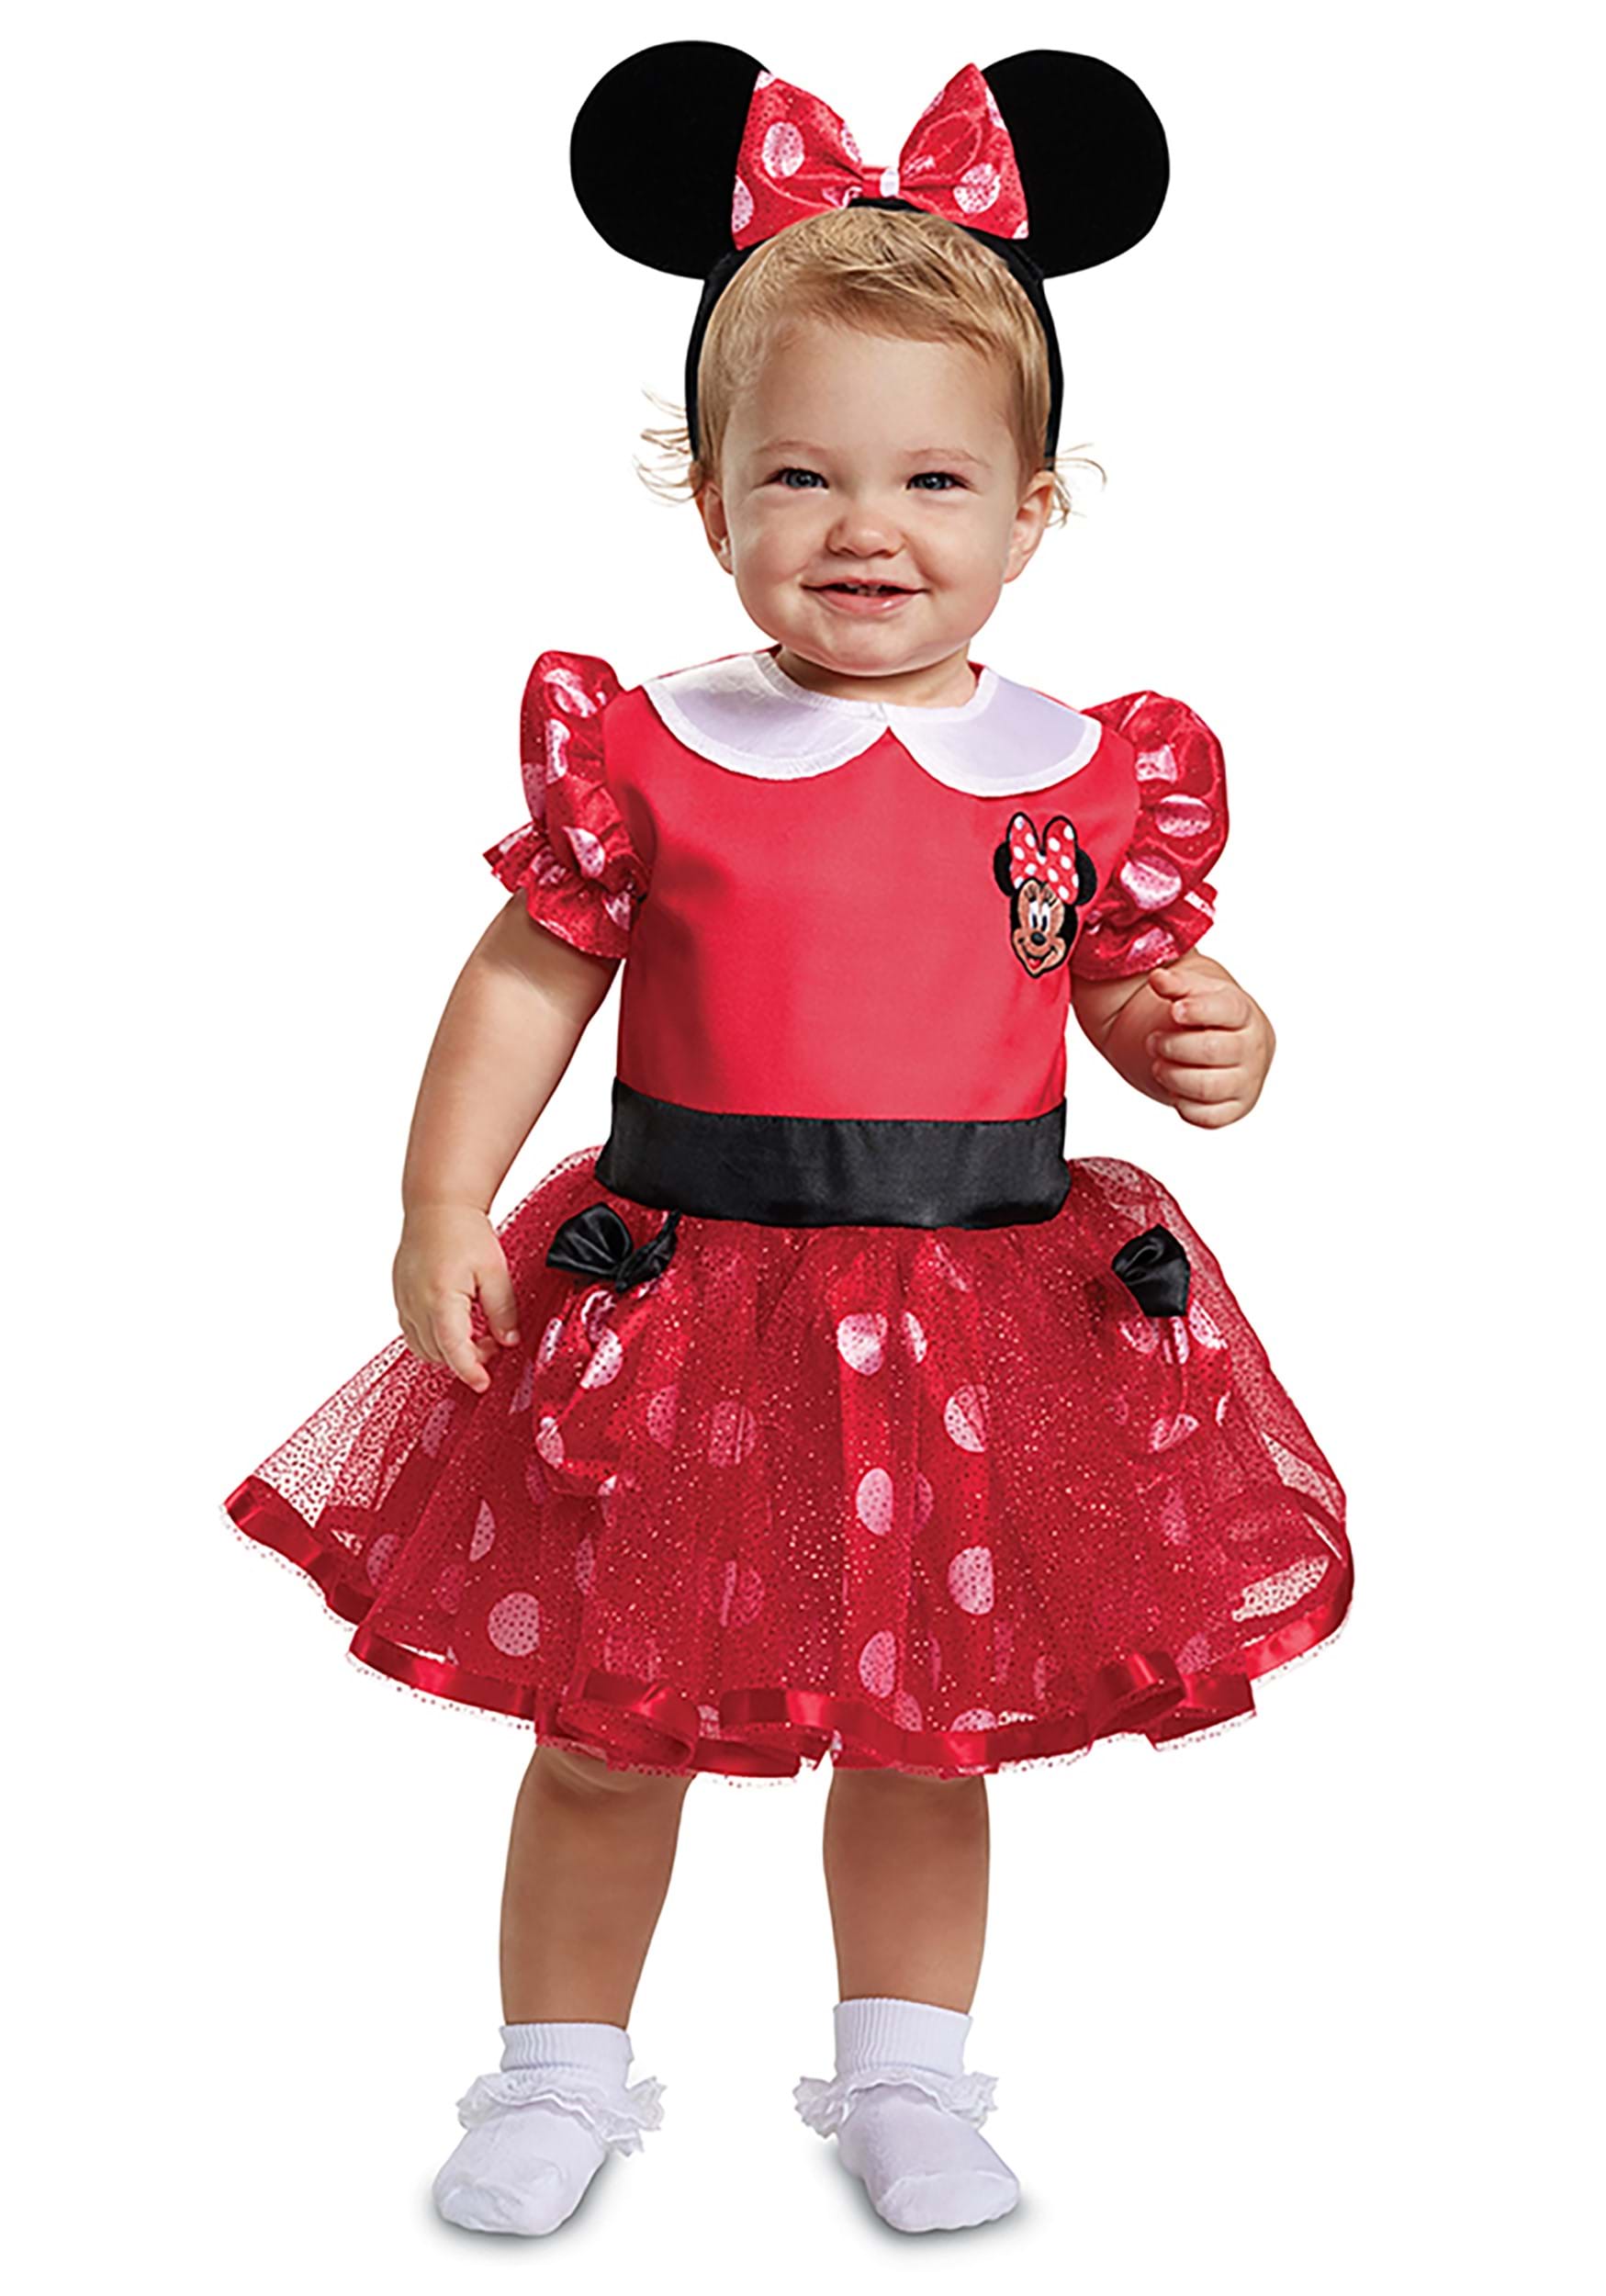 15+ Minnie Mouse Costume 2T